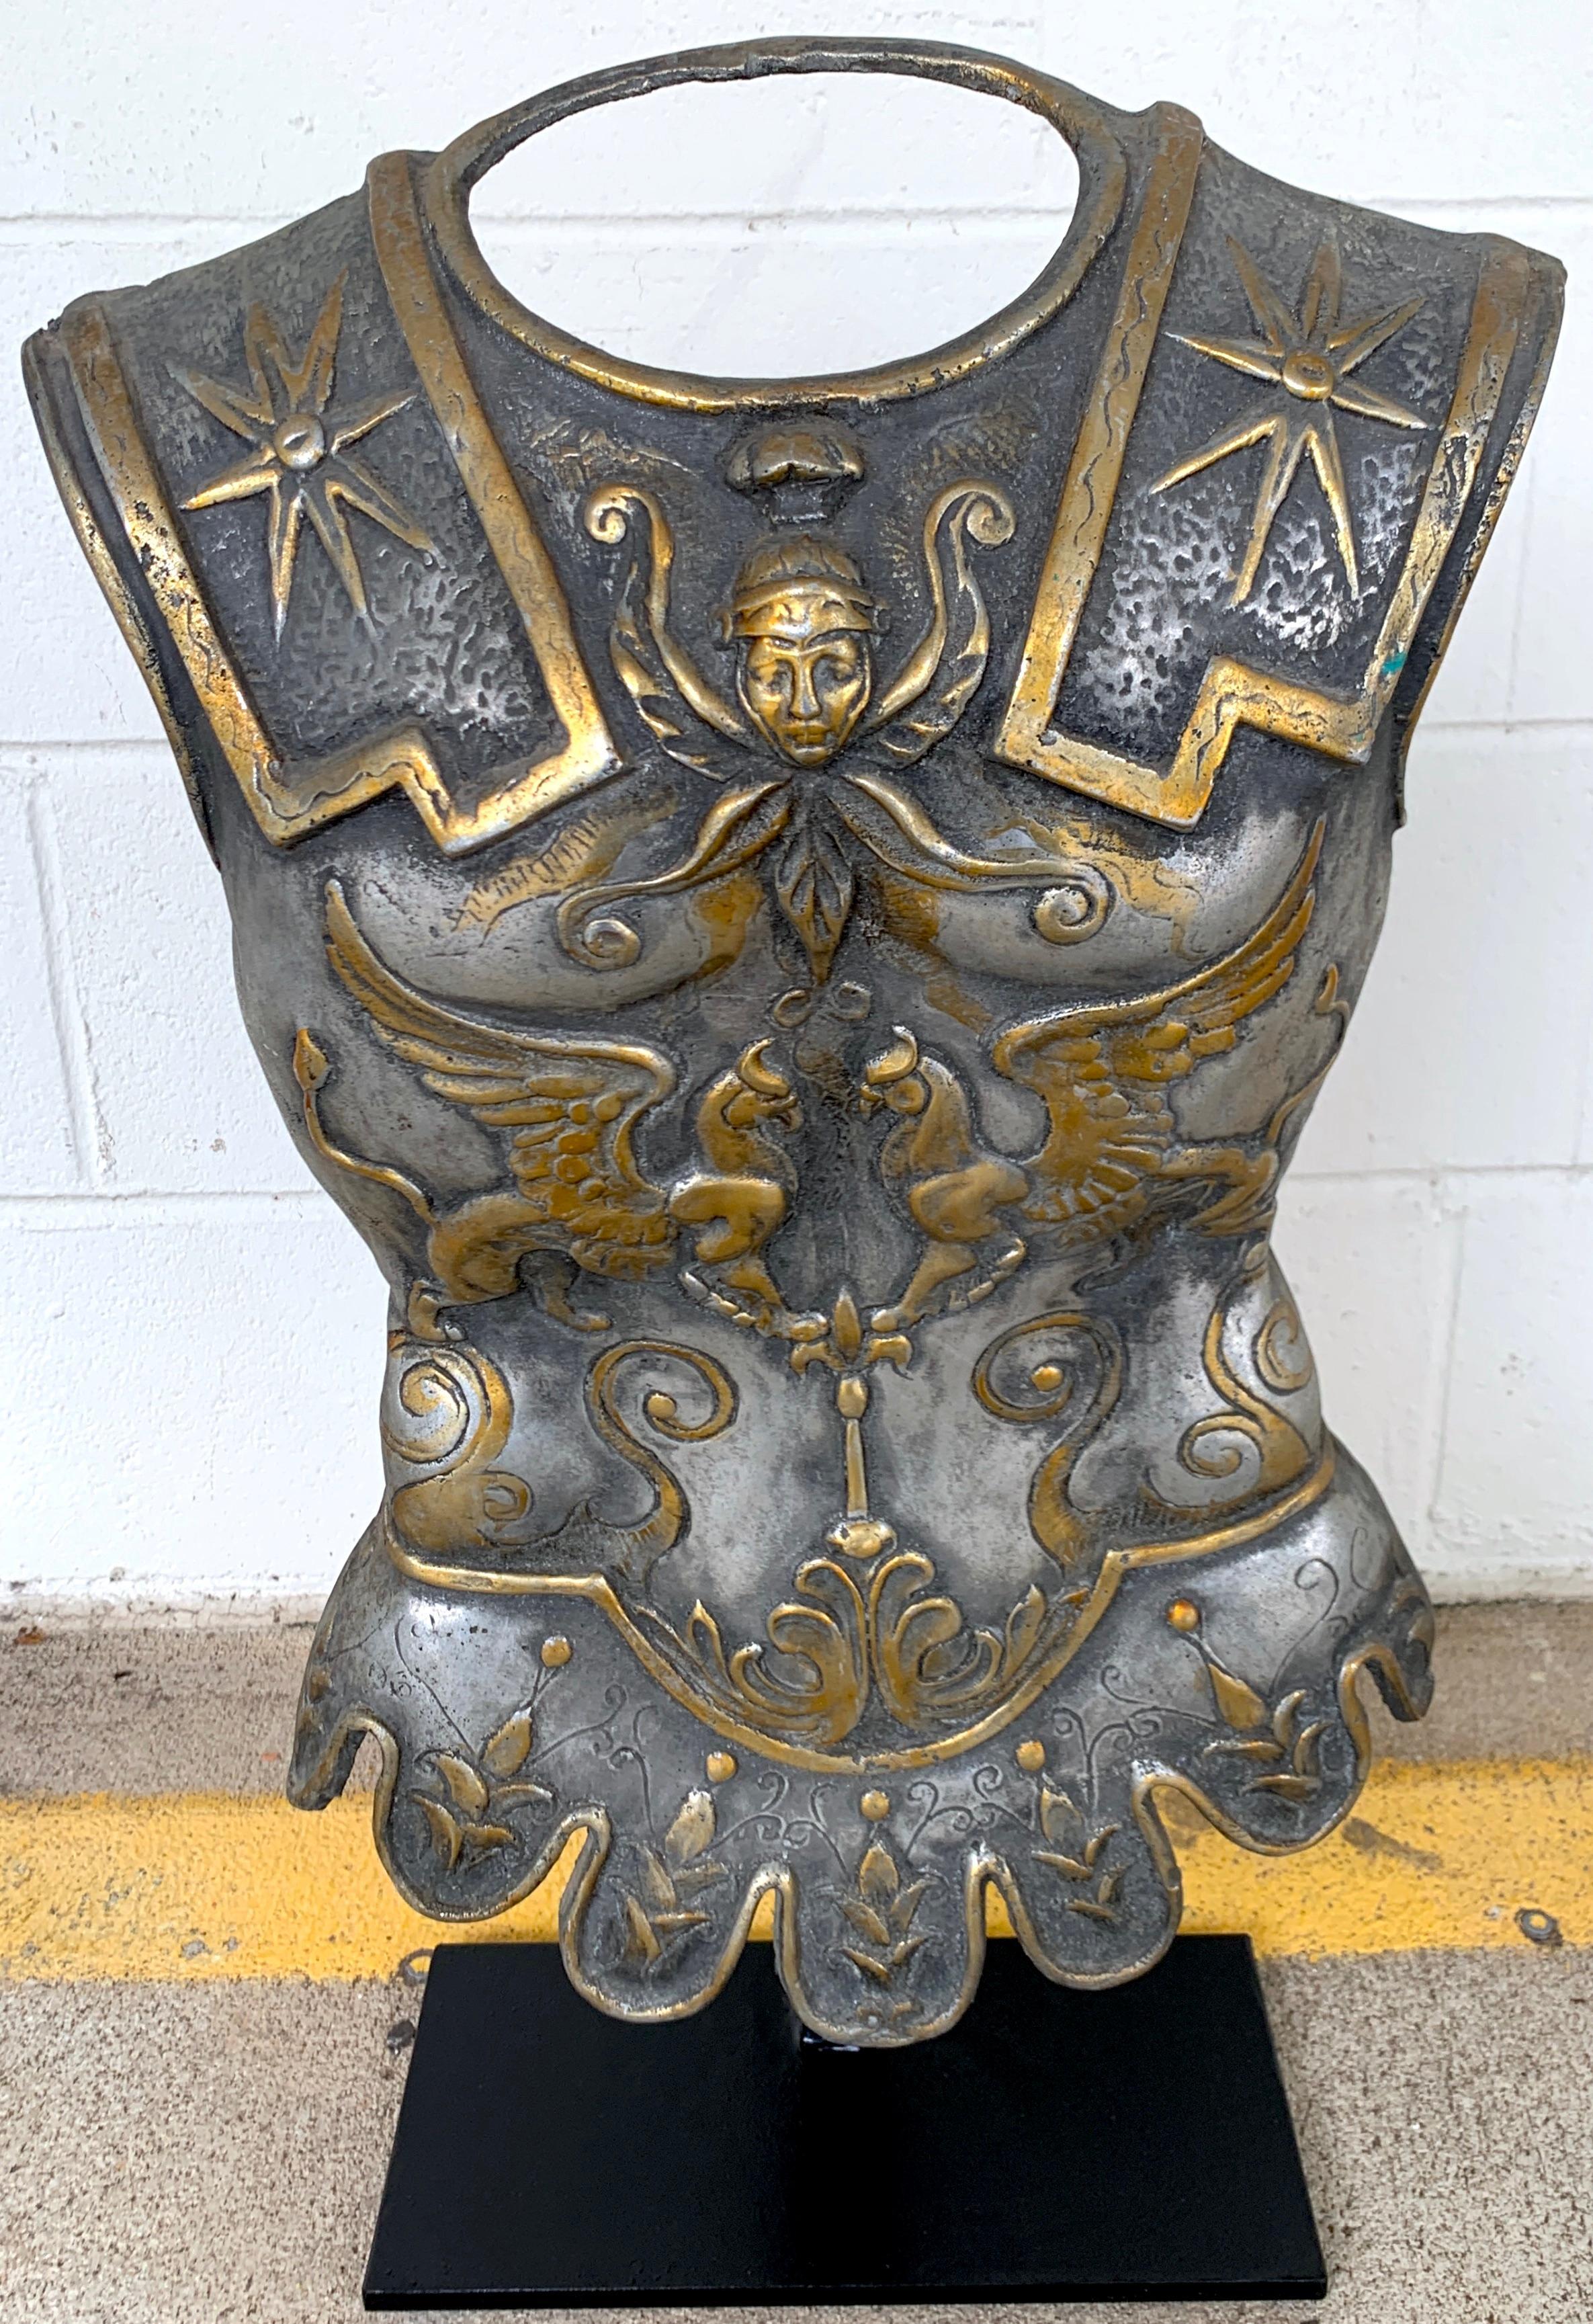 Grand tour model of a Roman breast plate, museum mounted
Realistically cast and modeled after the original, fine cast and gilt metal with 8 point stars, medallions, sphinxes and foliate decoration. Displayed on a custom iron stand 12